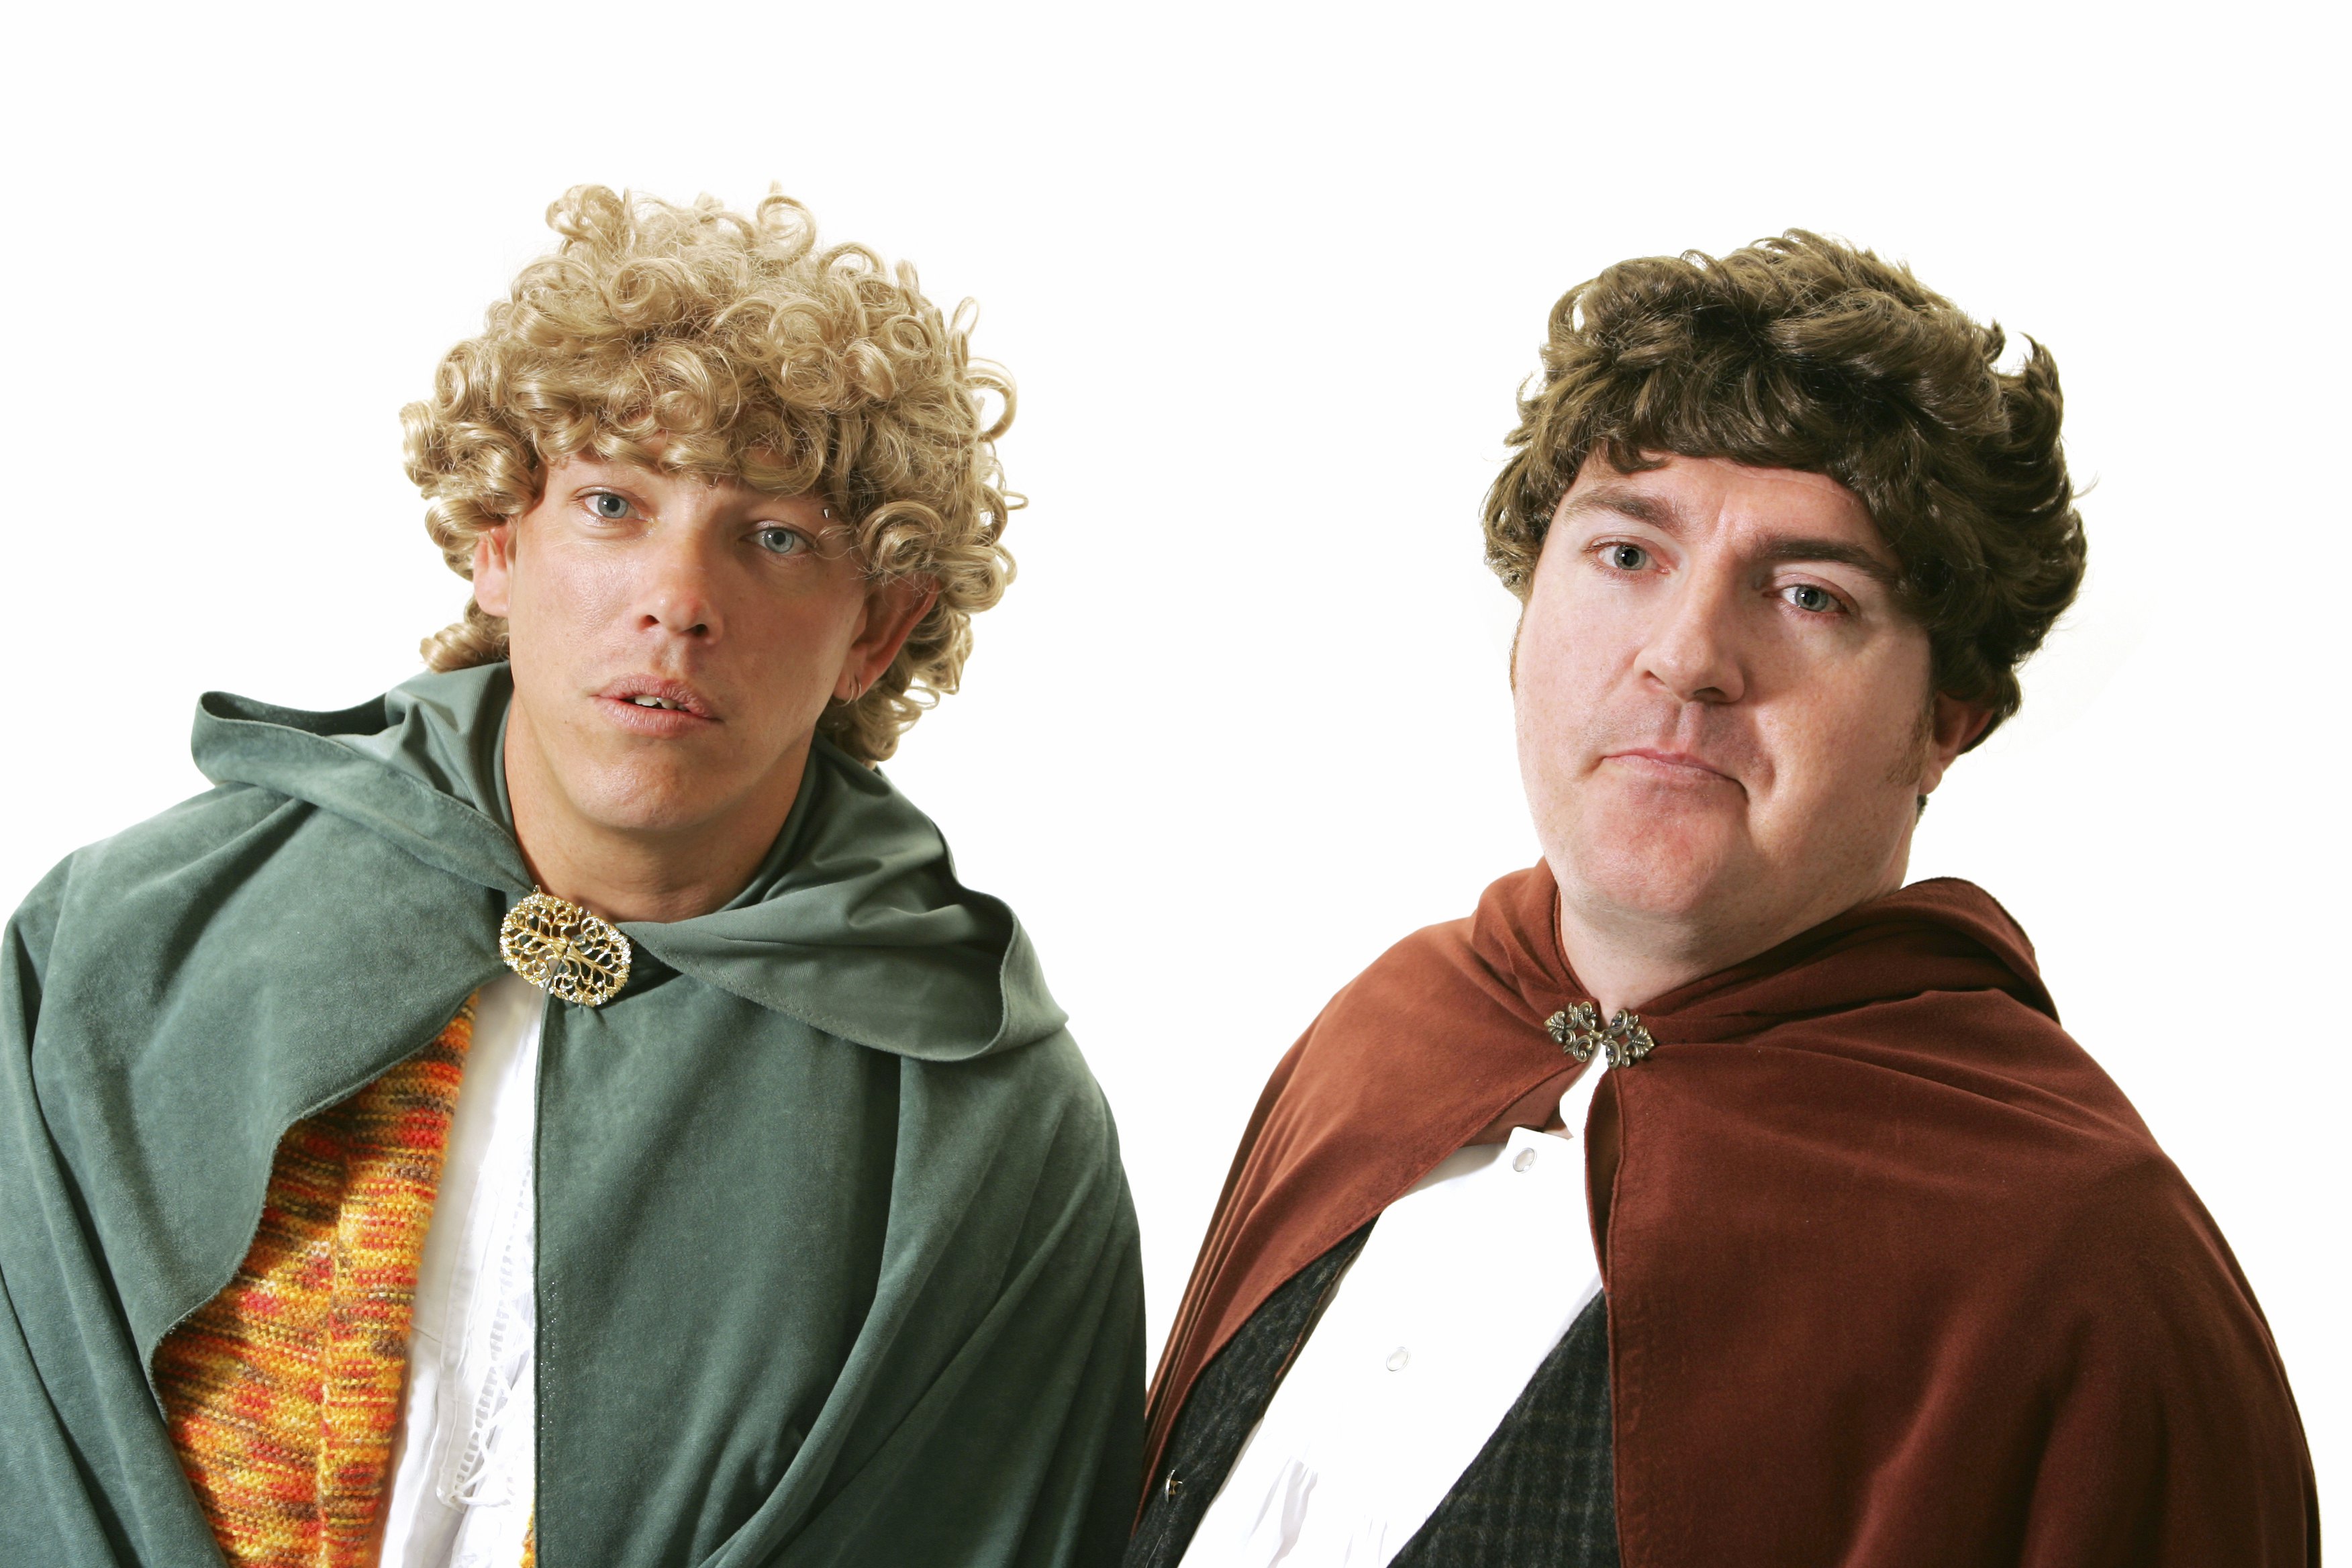 How to Make a Frodo Costume | eHow